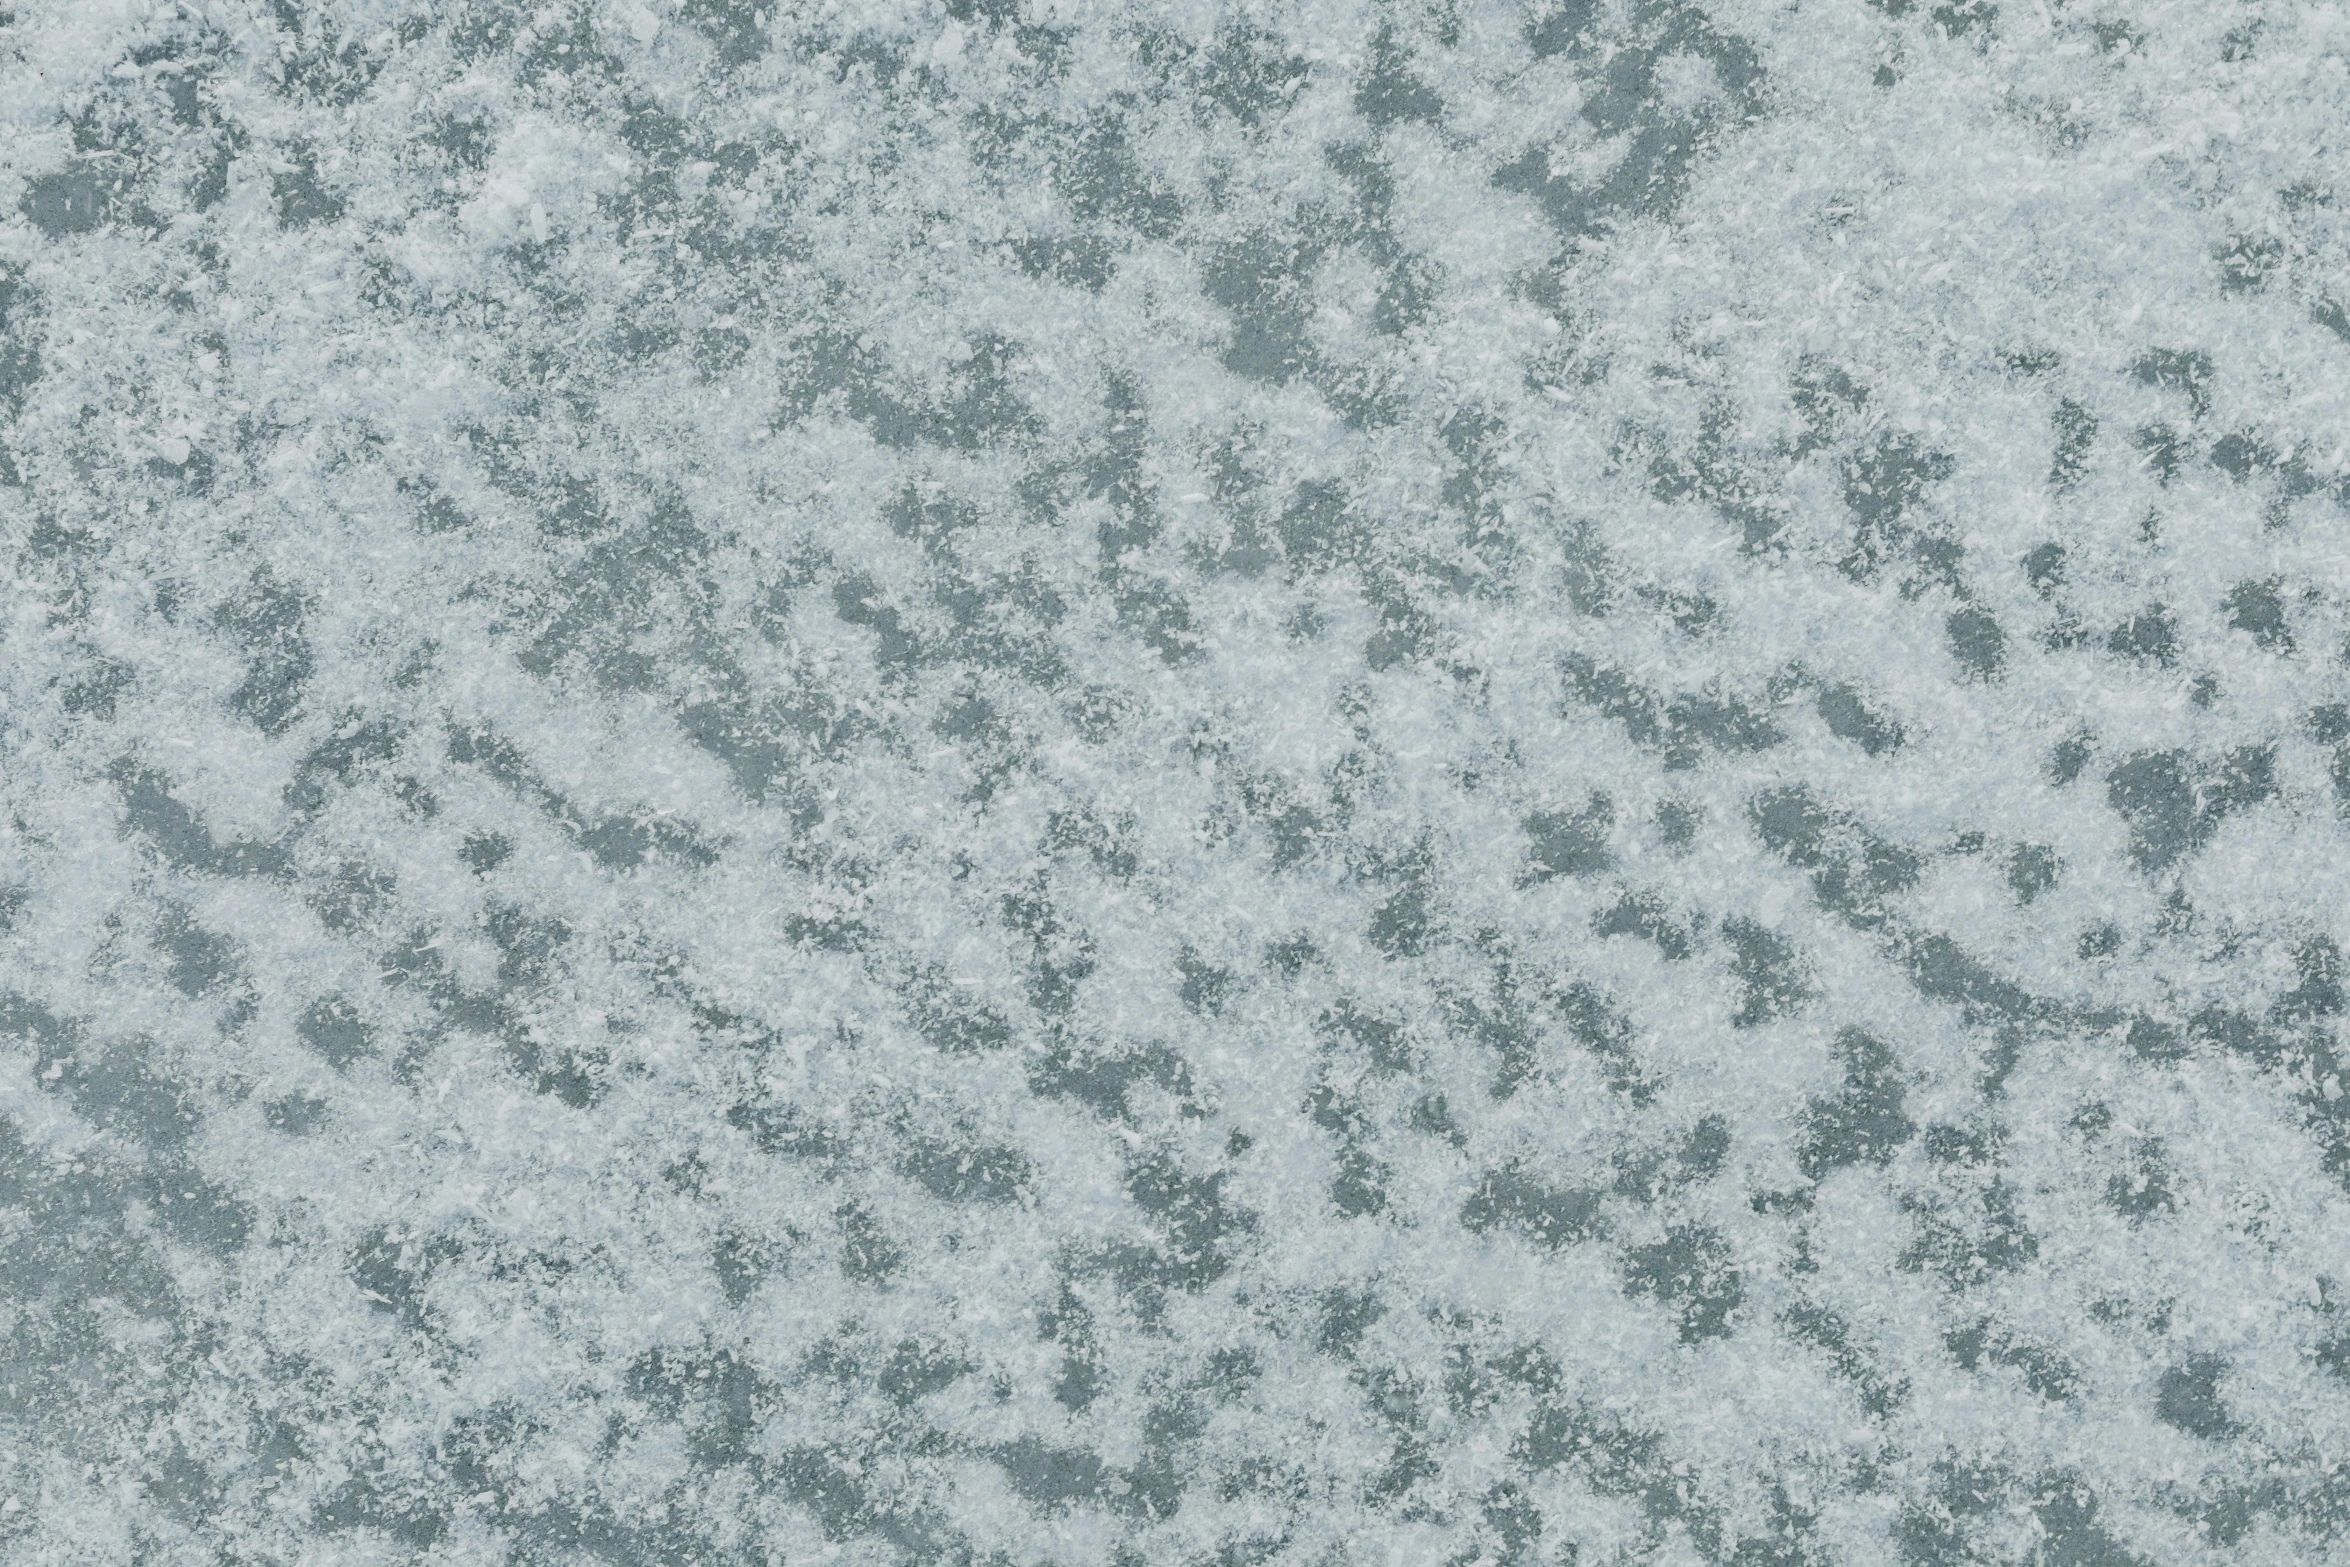 a close up of a snow covered surface, a stipple, inspired by Vija Celmins, tonalism, light blue mist, muted green, aluminum, computer generated